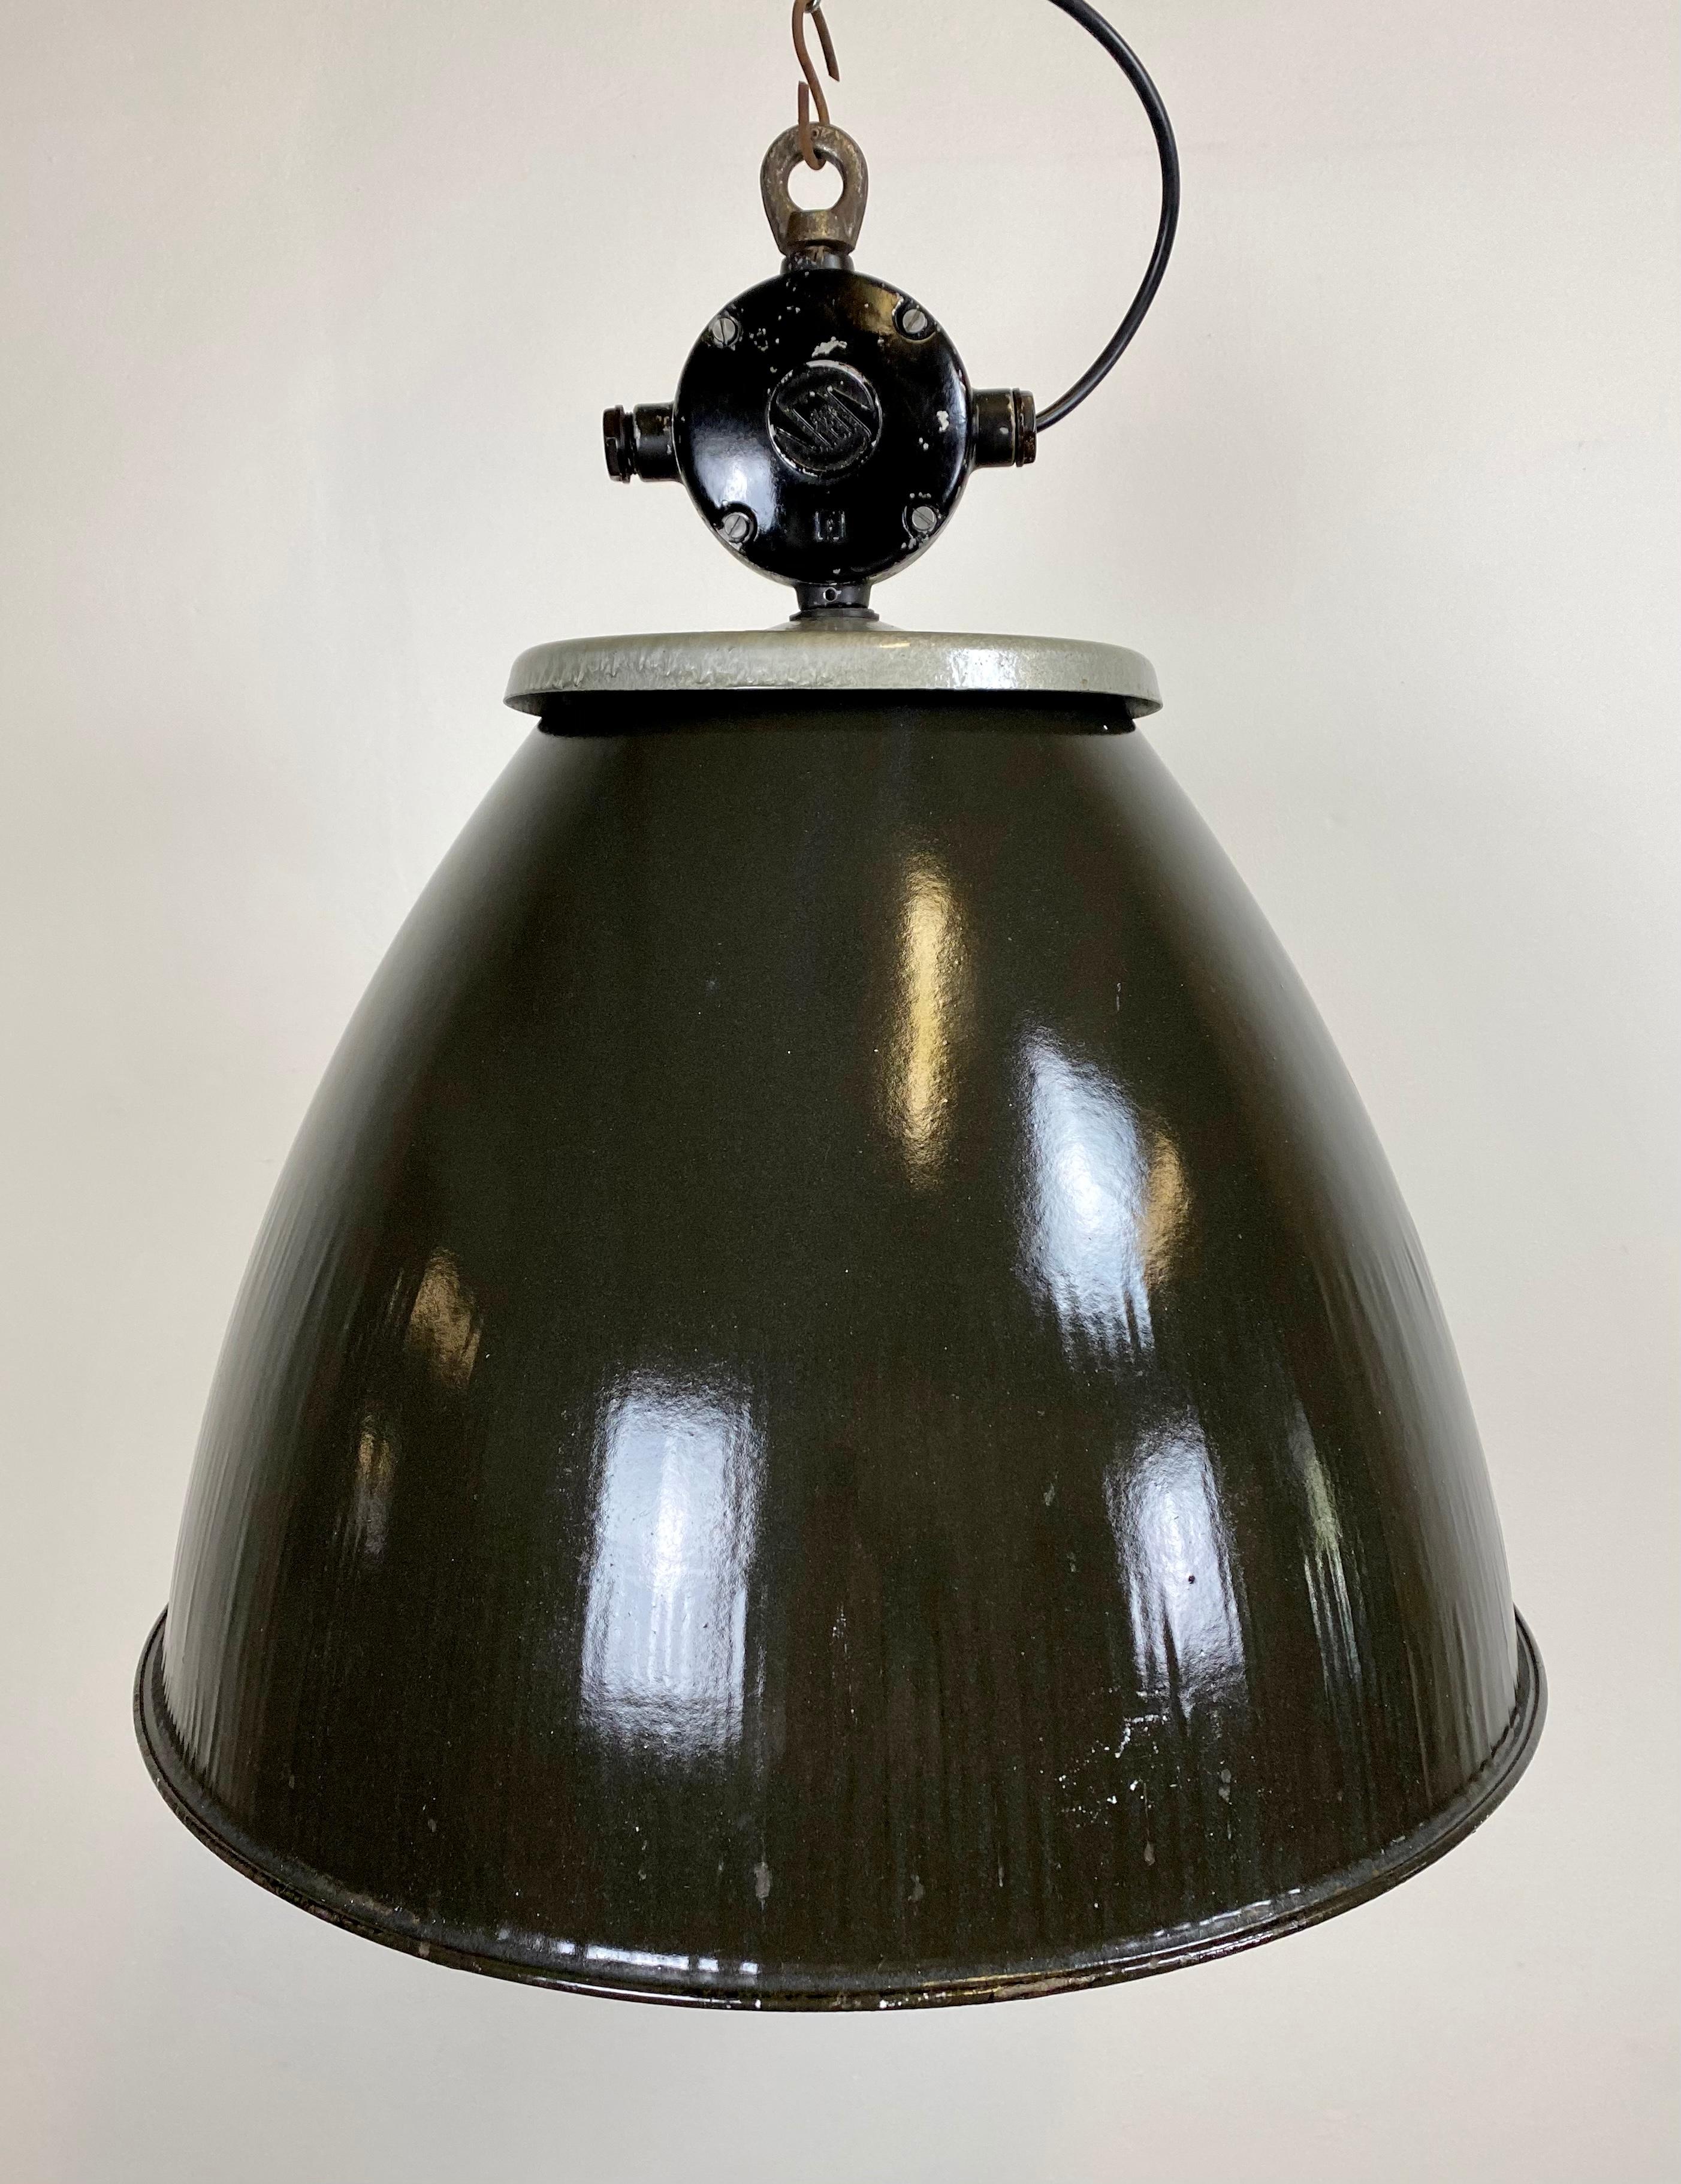 Industrial enamel hanging lamp made by Elektrosvit in former Czechoslovakia during the 1960s. It features a cast aluminium top, black enamel shade with white interior, new socket for E 27 lightbulbs and new wire. The lamp weighs 6 `kg. The lampshade